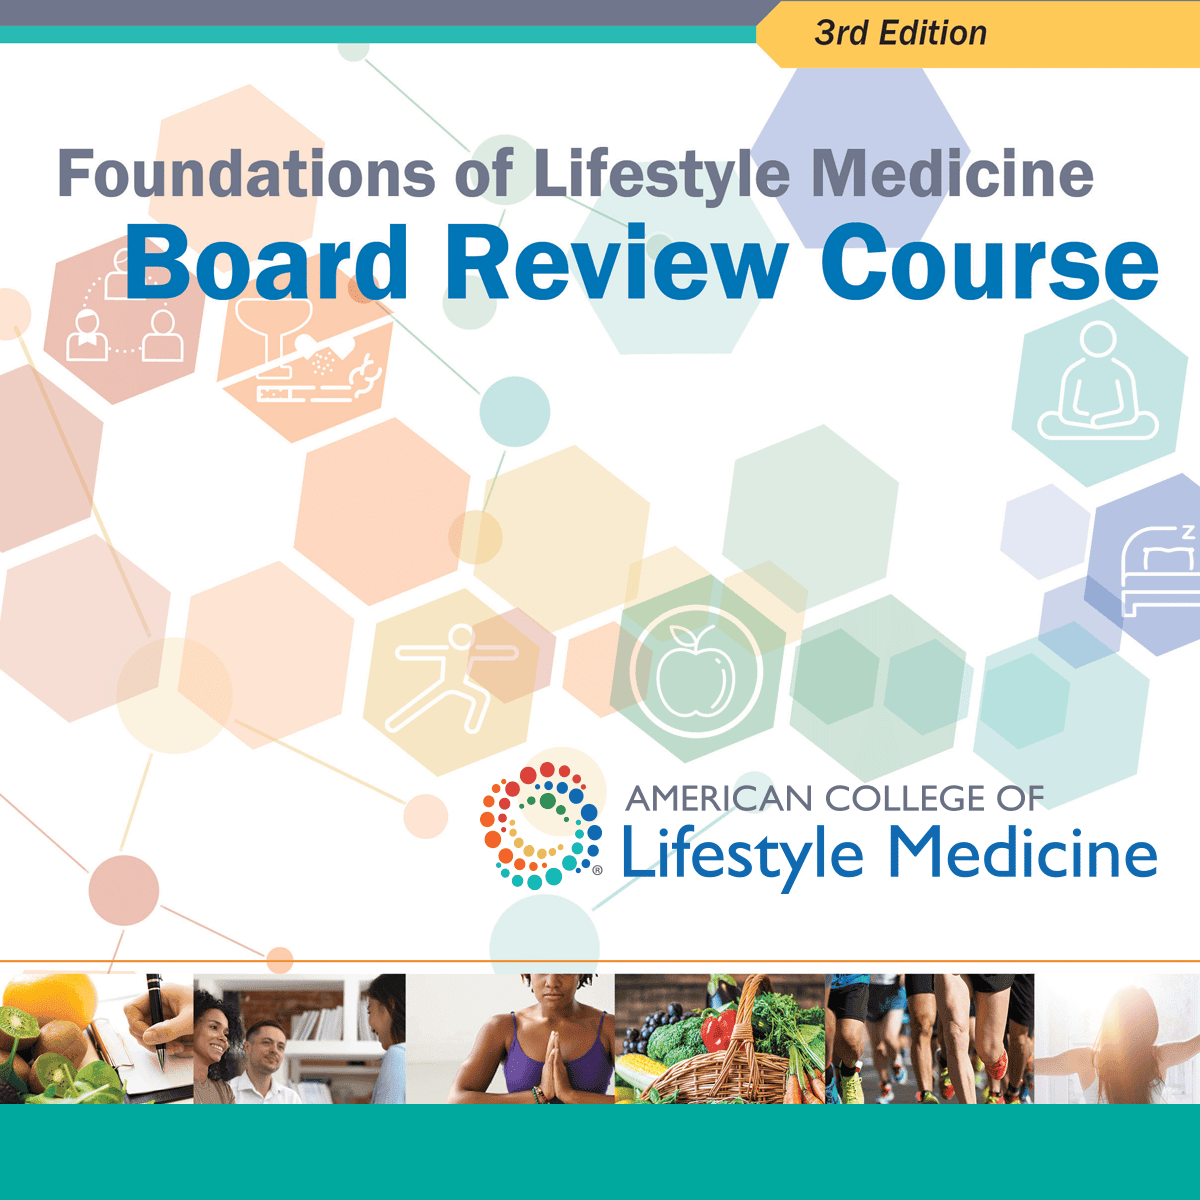 Foundations of Lifestyle Medicine Board Review Course Offering